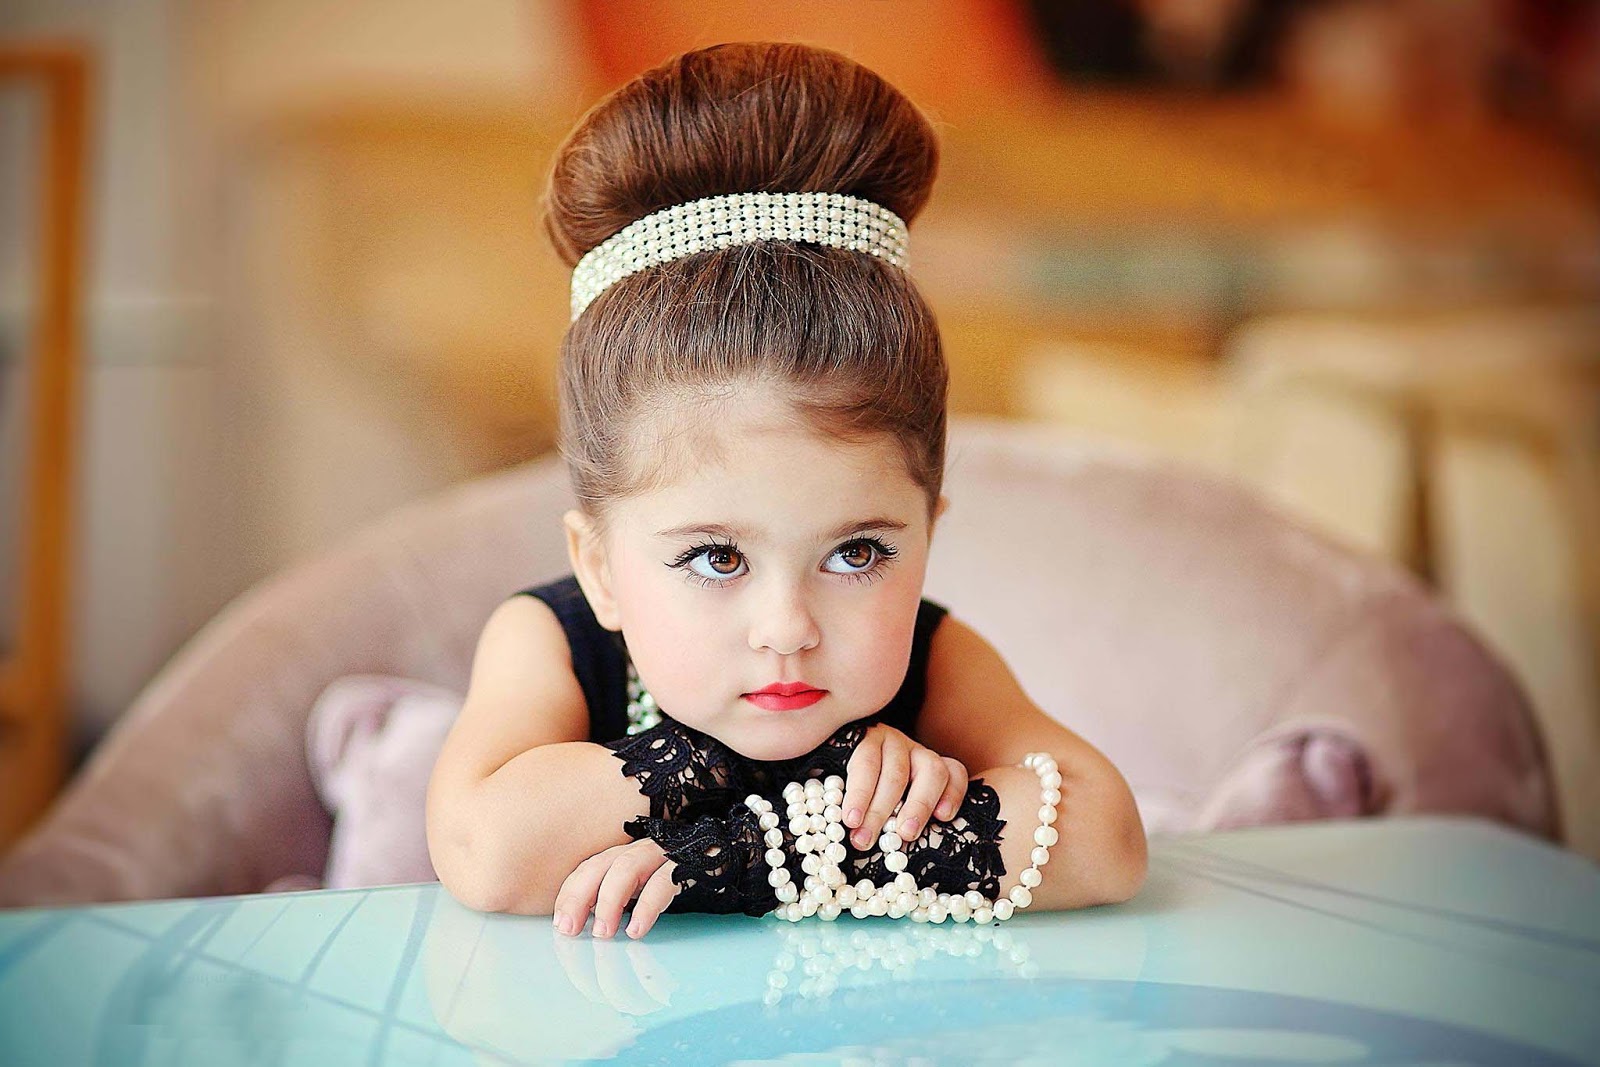 Cute And Lovely Baby Pictures Free Download -5097